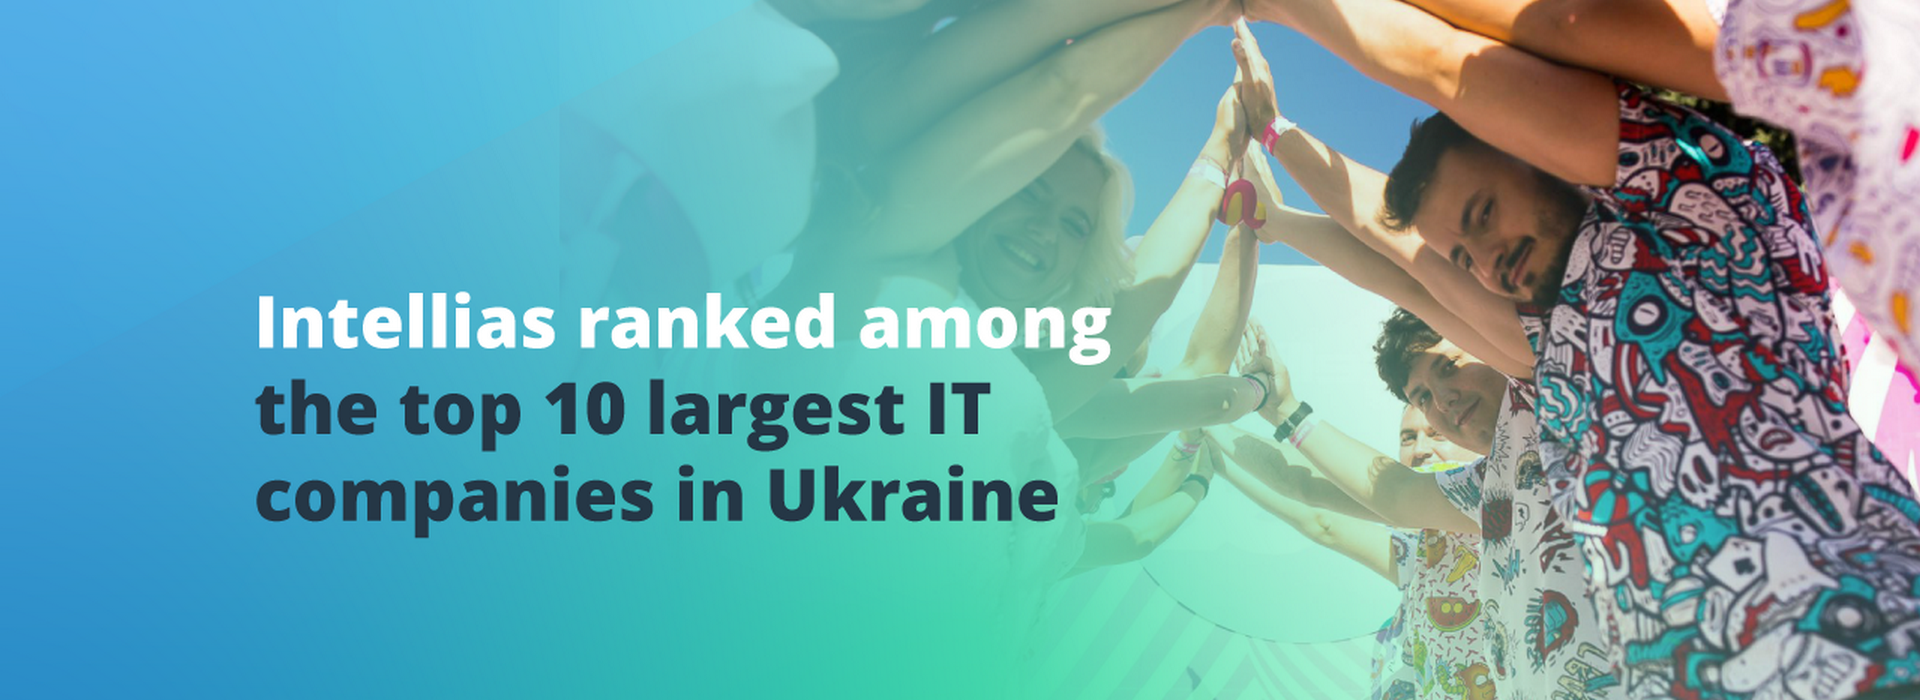 Intellias Ranked Among the Top 10 Biggest IT Companies in Ukraine